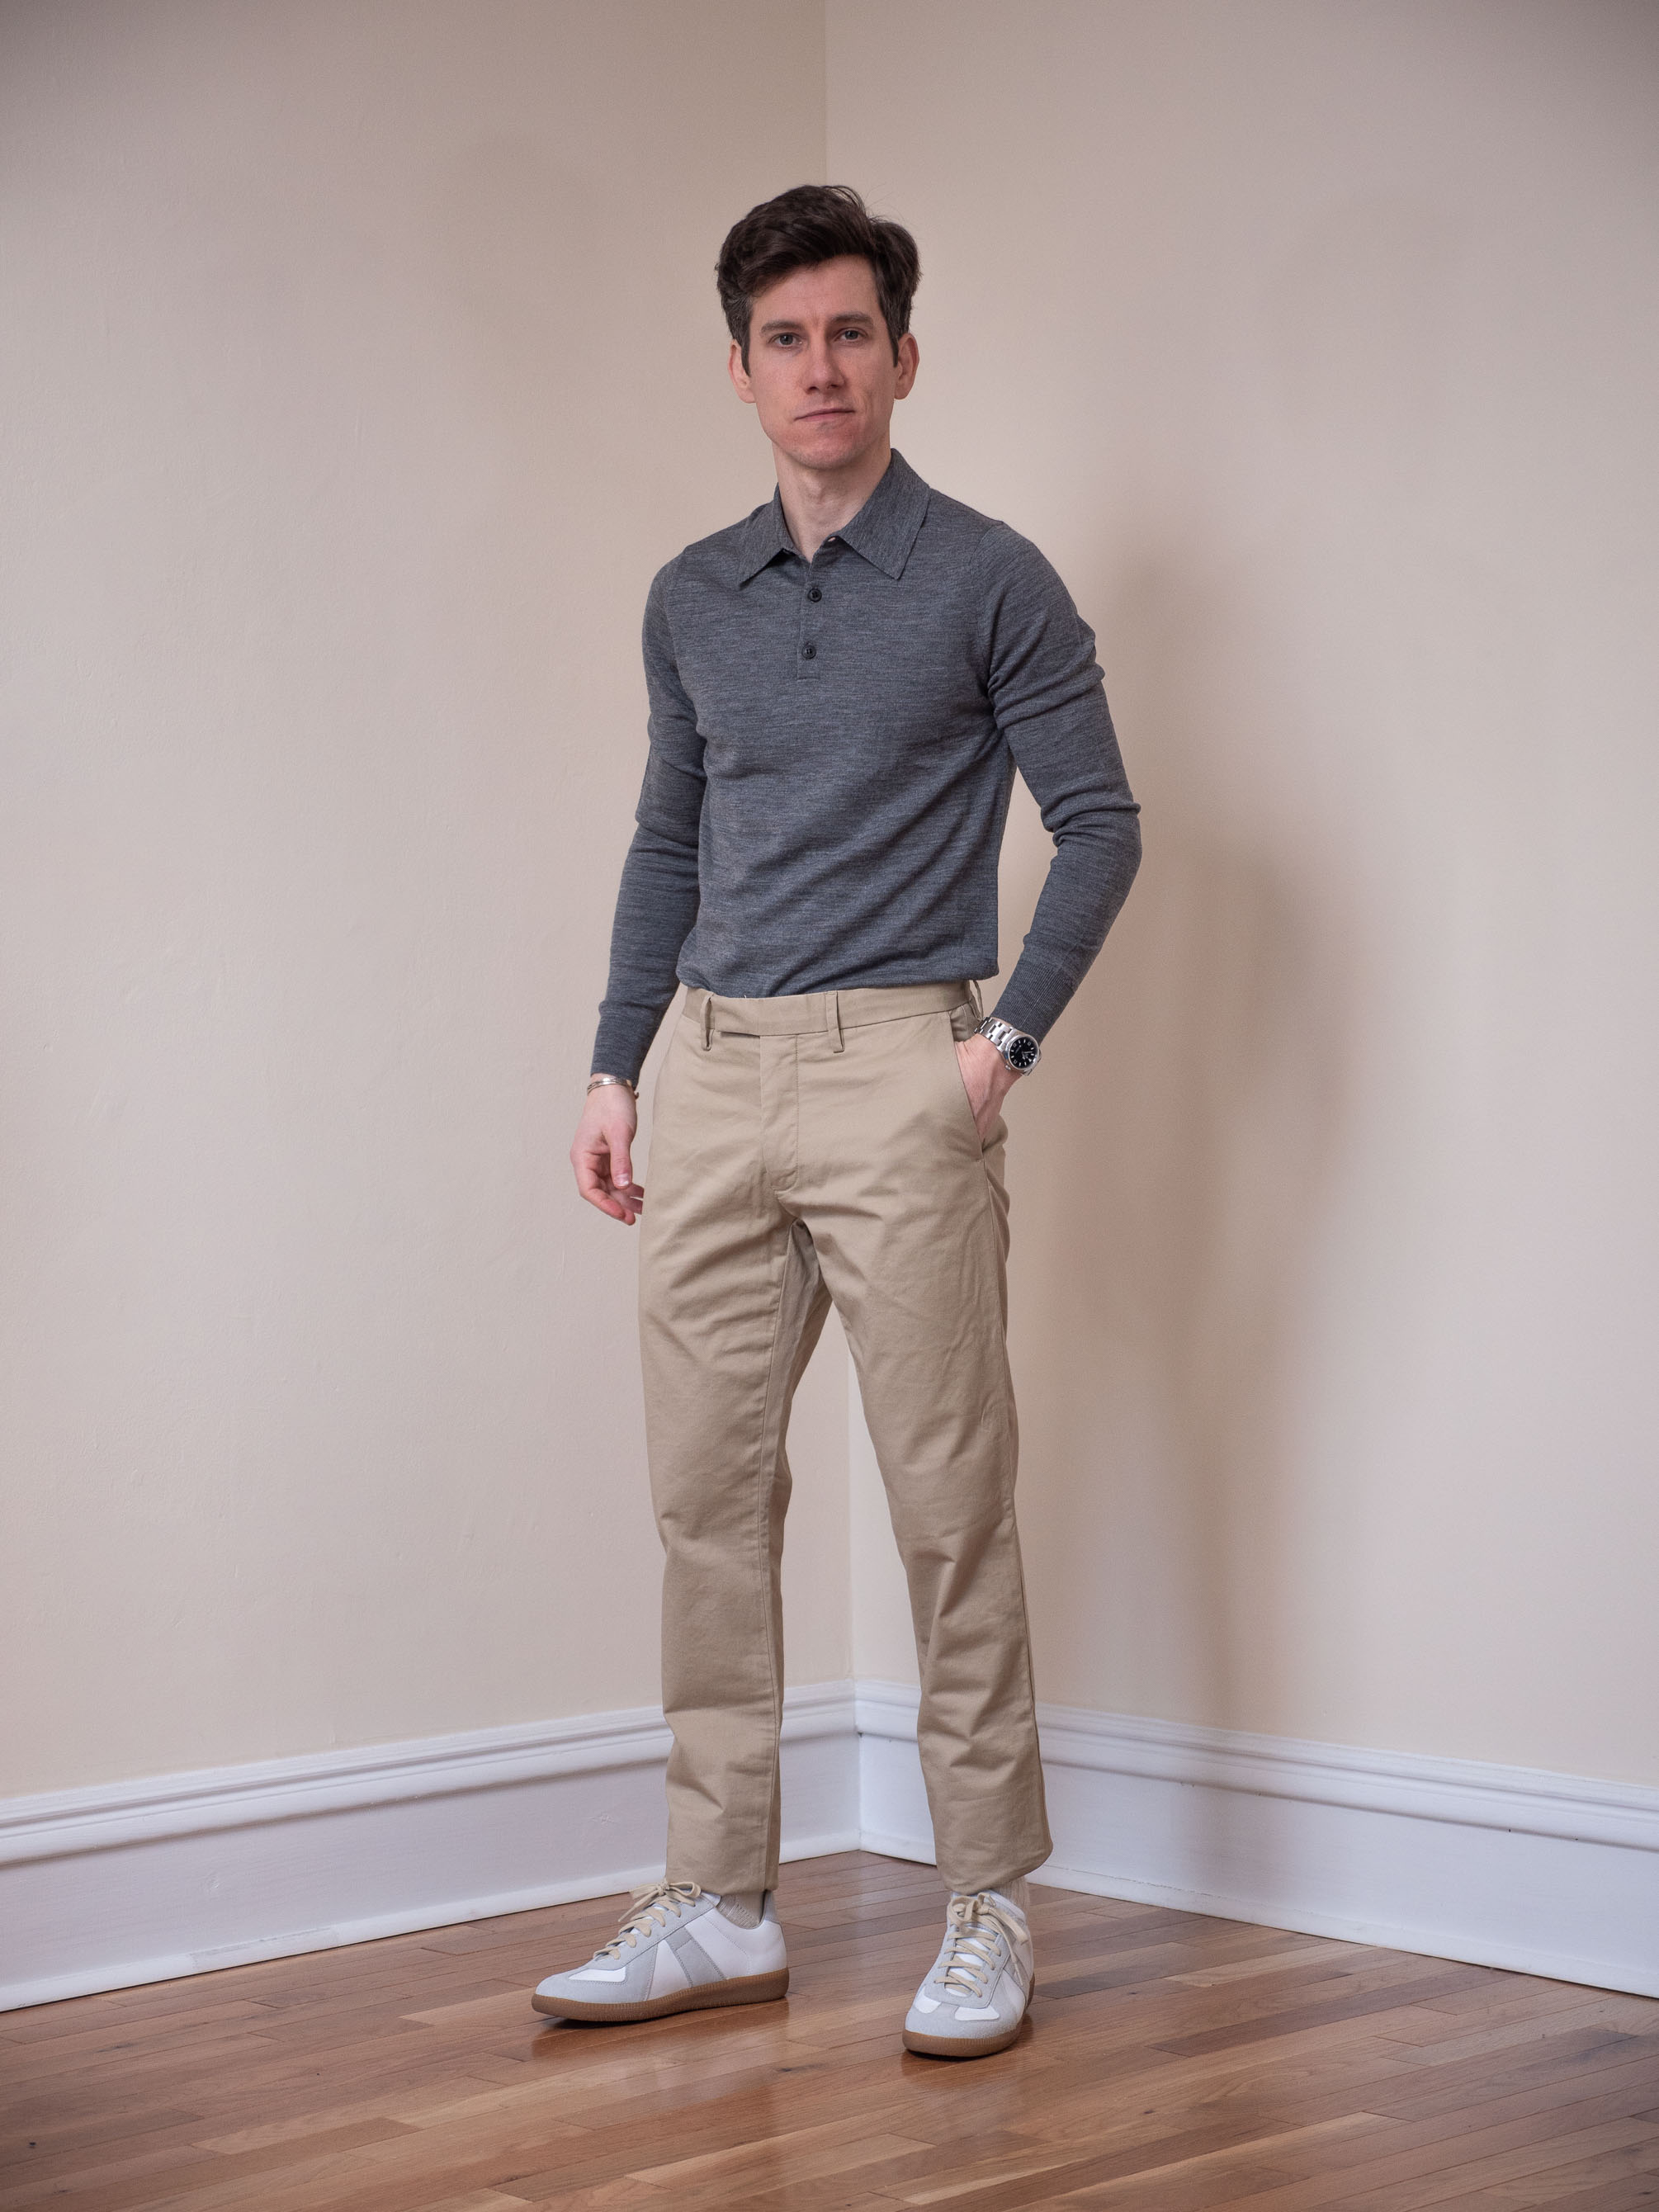 mens khakis outfit